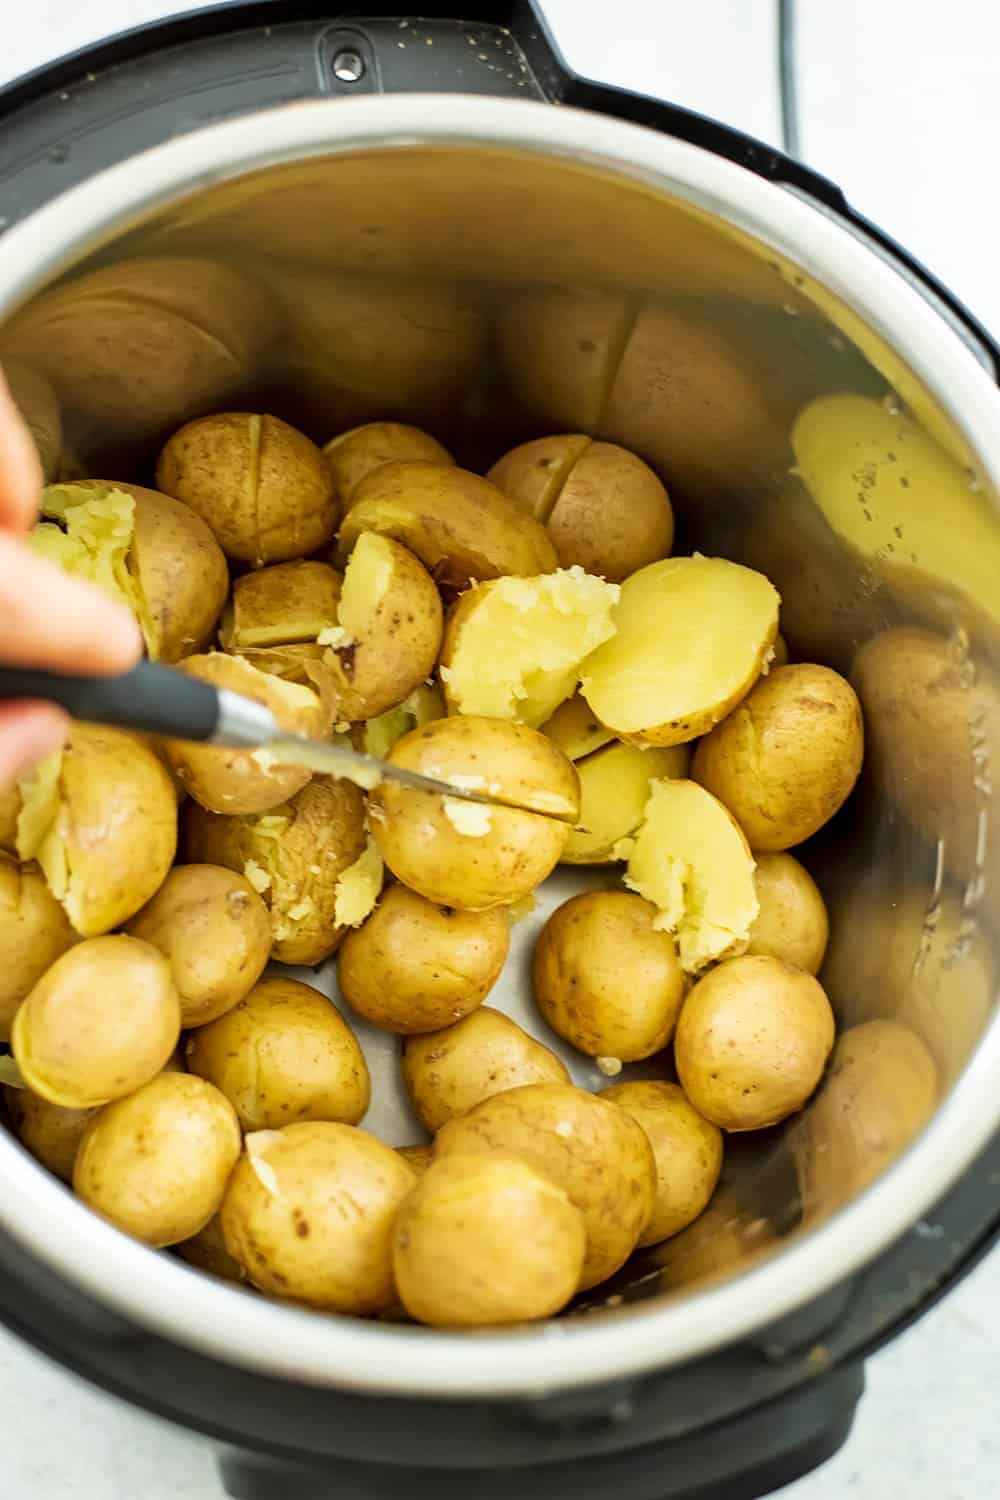 Knife cutting the potatoes in the instant pot.